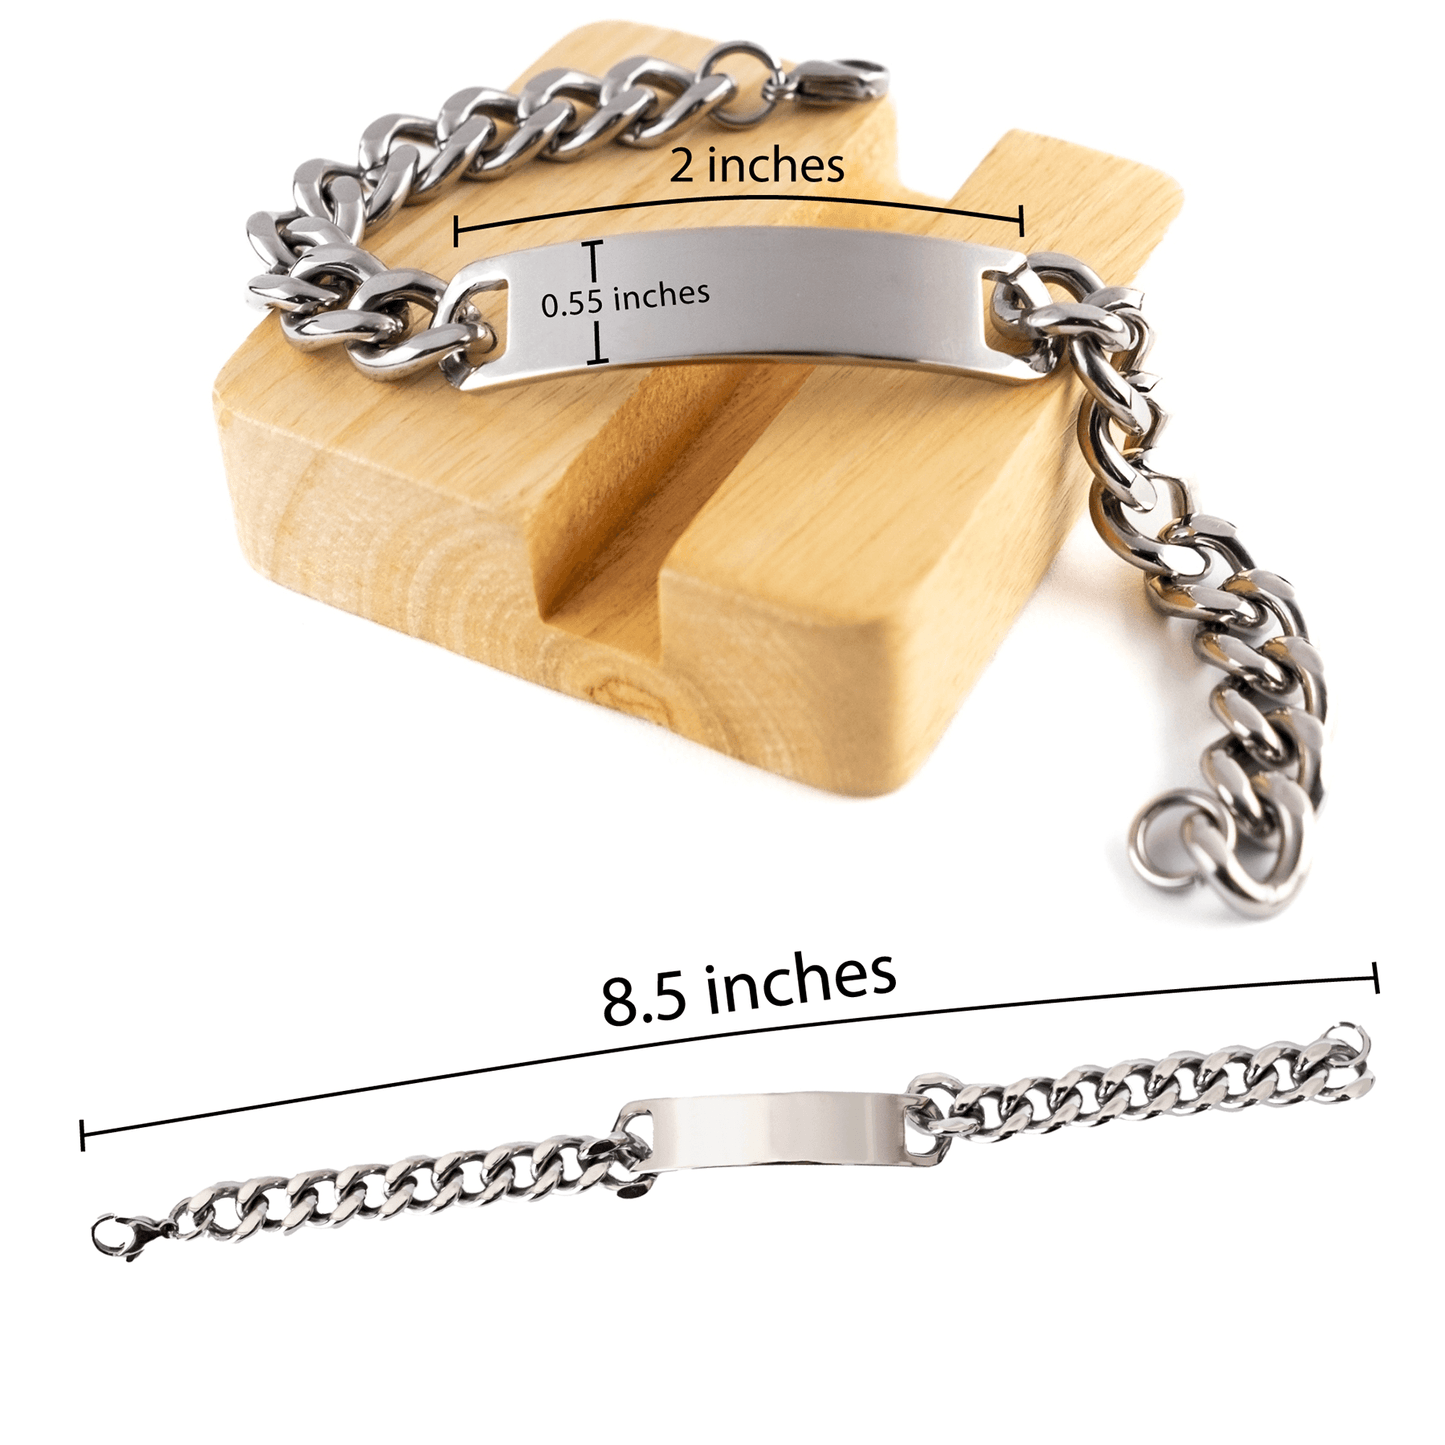 Crane Operator Cuban Chain Link Engraved Bracelet - Thanks for being who you are - Birthday Christmas Jewelry Gifts Coworkers Colleague Boss - Mallard Moon Gift Shop